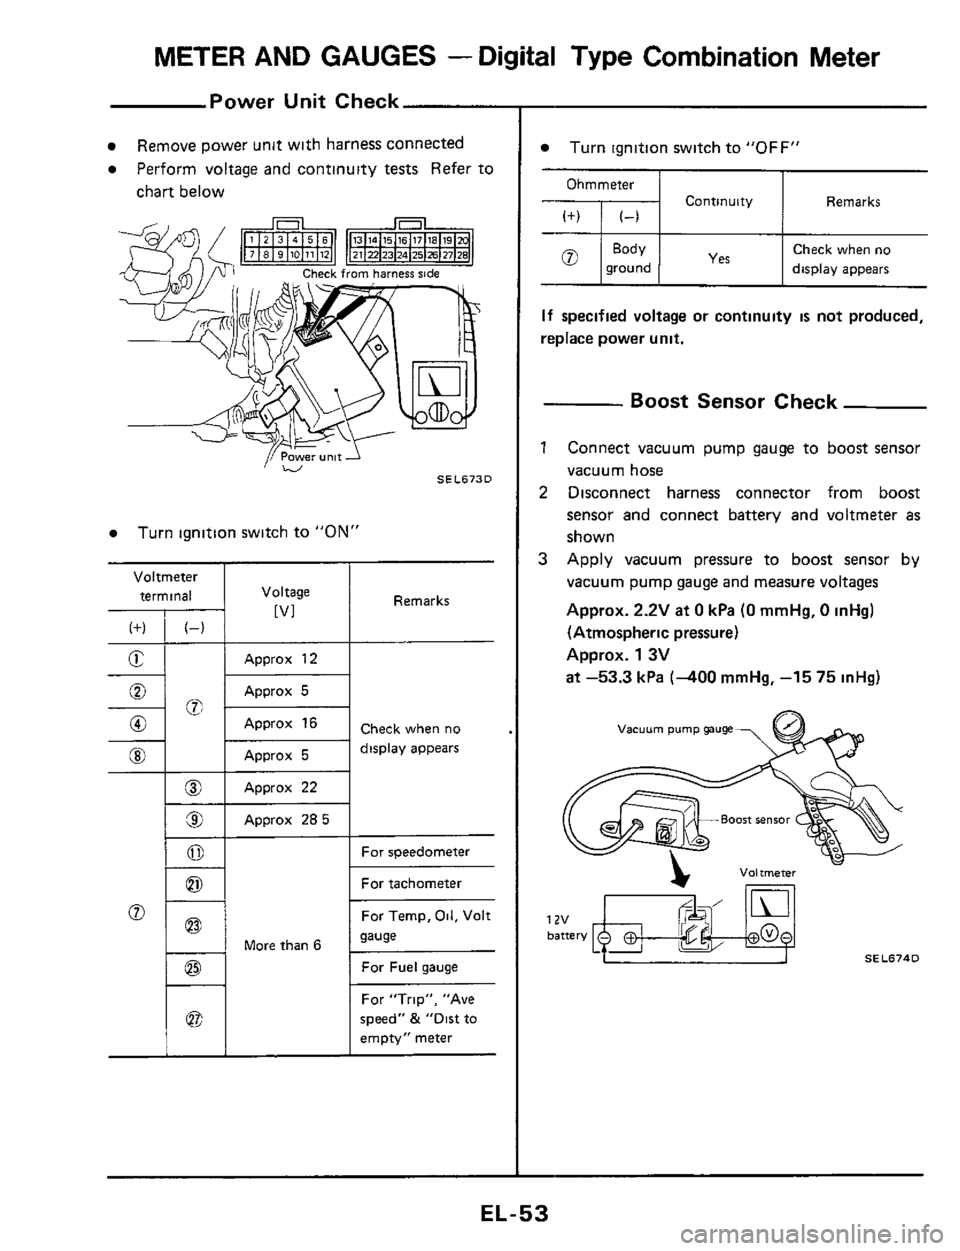 NISSAN 300ZX 1984 Z31 Electrical System Repair Manual METER AND GAUGES - Digital Type Combination Meter 
Power Unit Check 
Voltmeter 
terminal 
(f) (-) 
E - 
-%; 0 
0 
@I 
__ 
@ 
9 
0 
0 
Remove  power unit with  harness  connected 
Perform  voltage and 